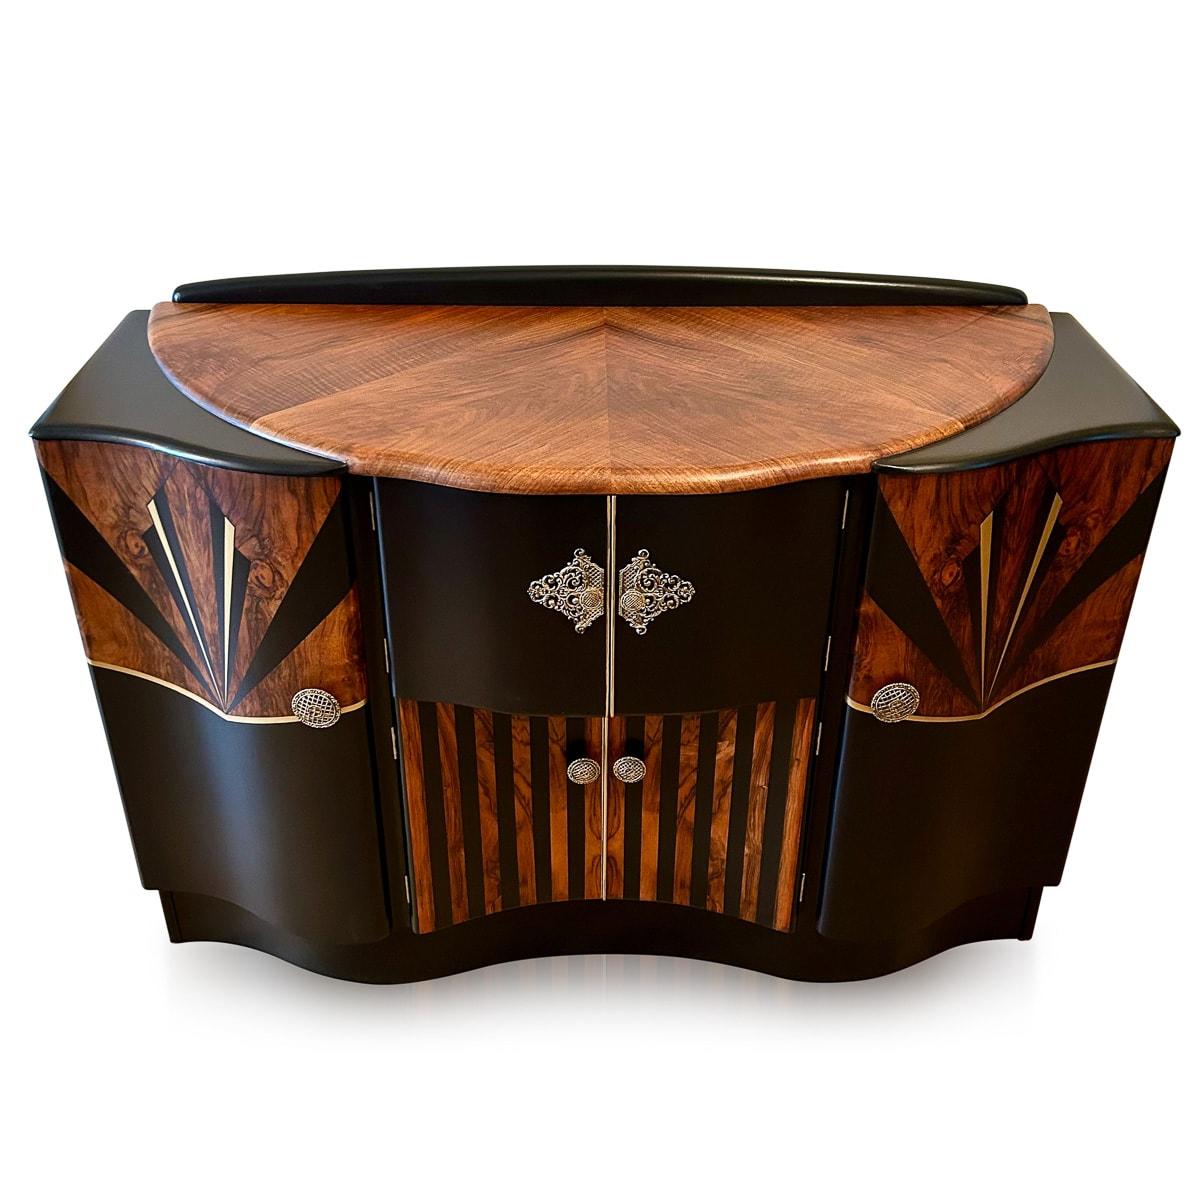 Stunning mid-20th Century Art Deco cocktail cabinet, meticulously crafted with exquisite attention to detail. This captivating piece features gracefully curved doors featuring hand painted motifs outside and inside, evoking a sense of luxury and